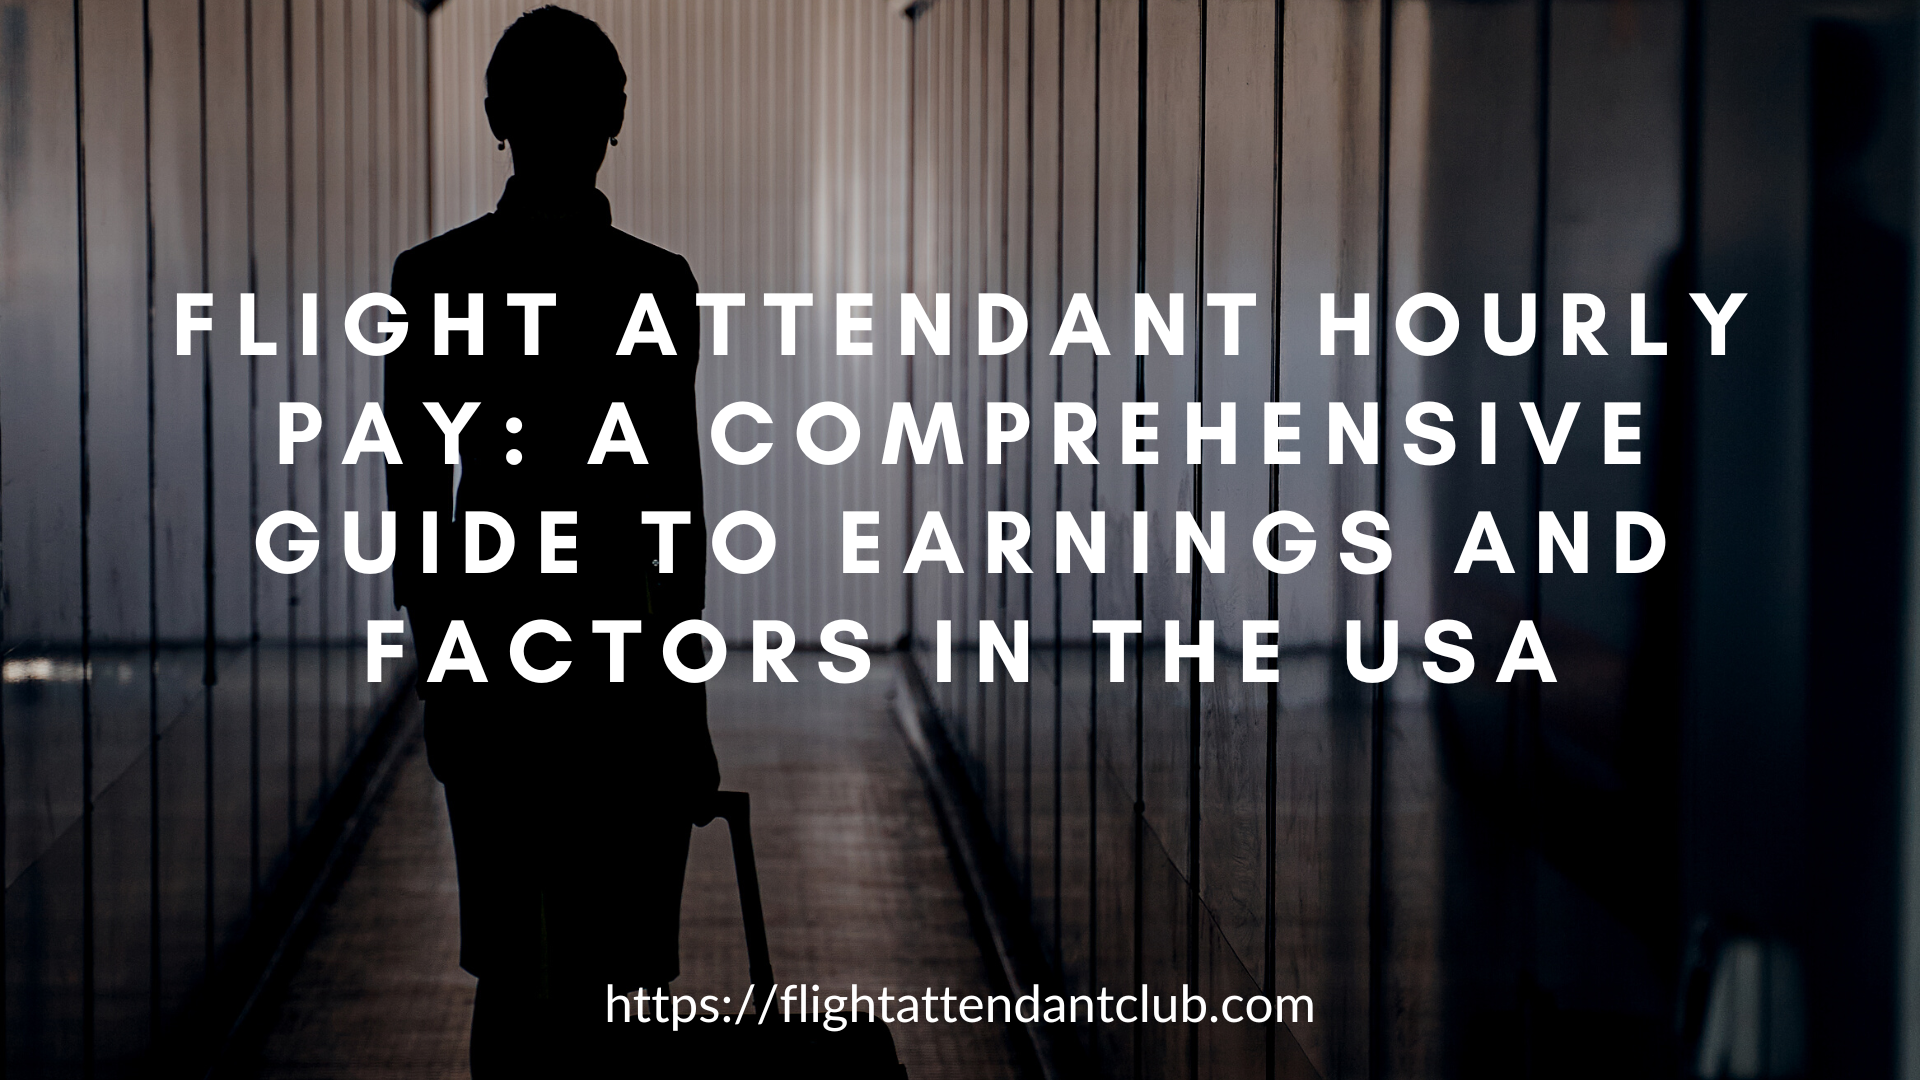 Flight Attendant Hourly Pay A Comprehensive Guide to Earnings and Factors in the USA